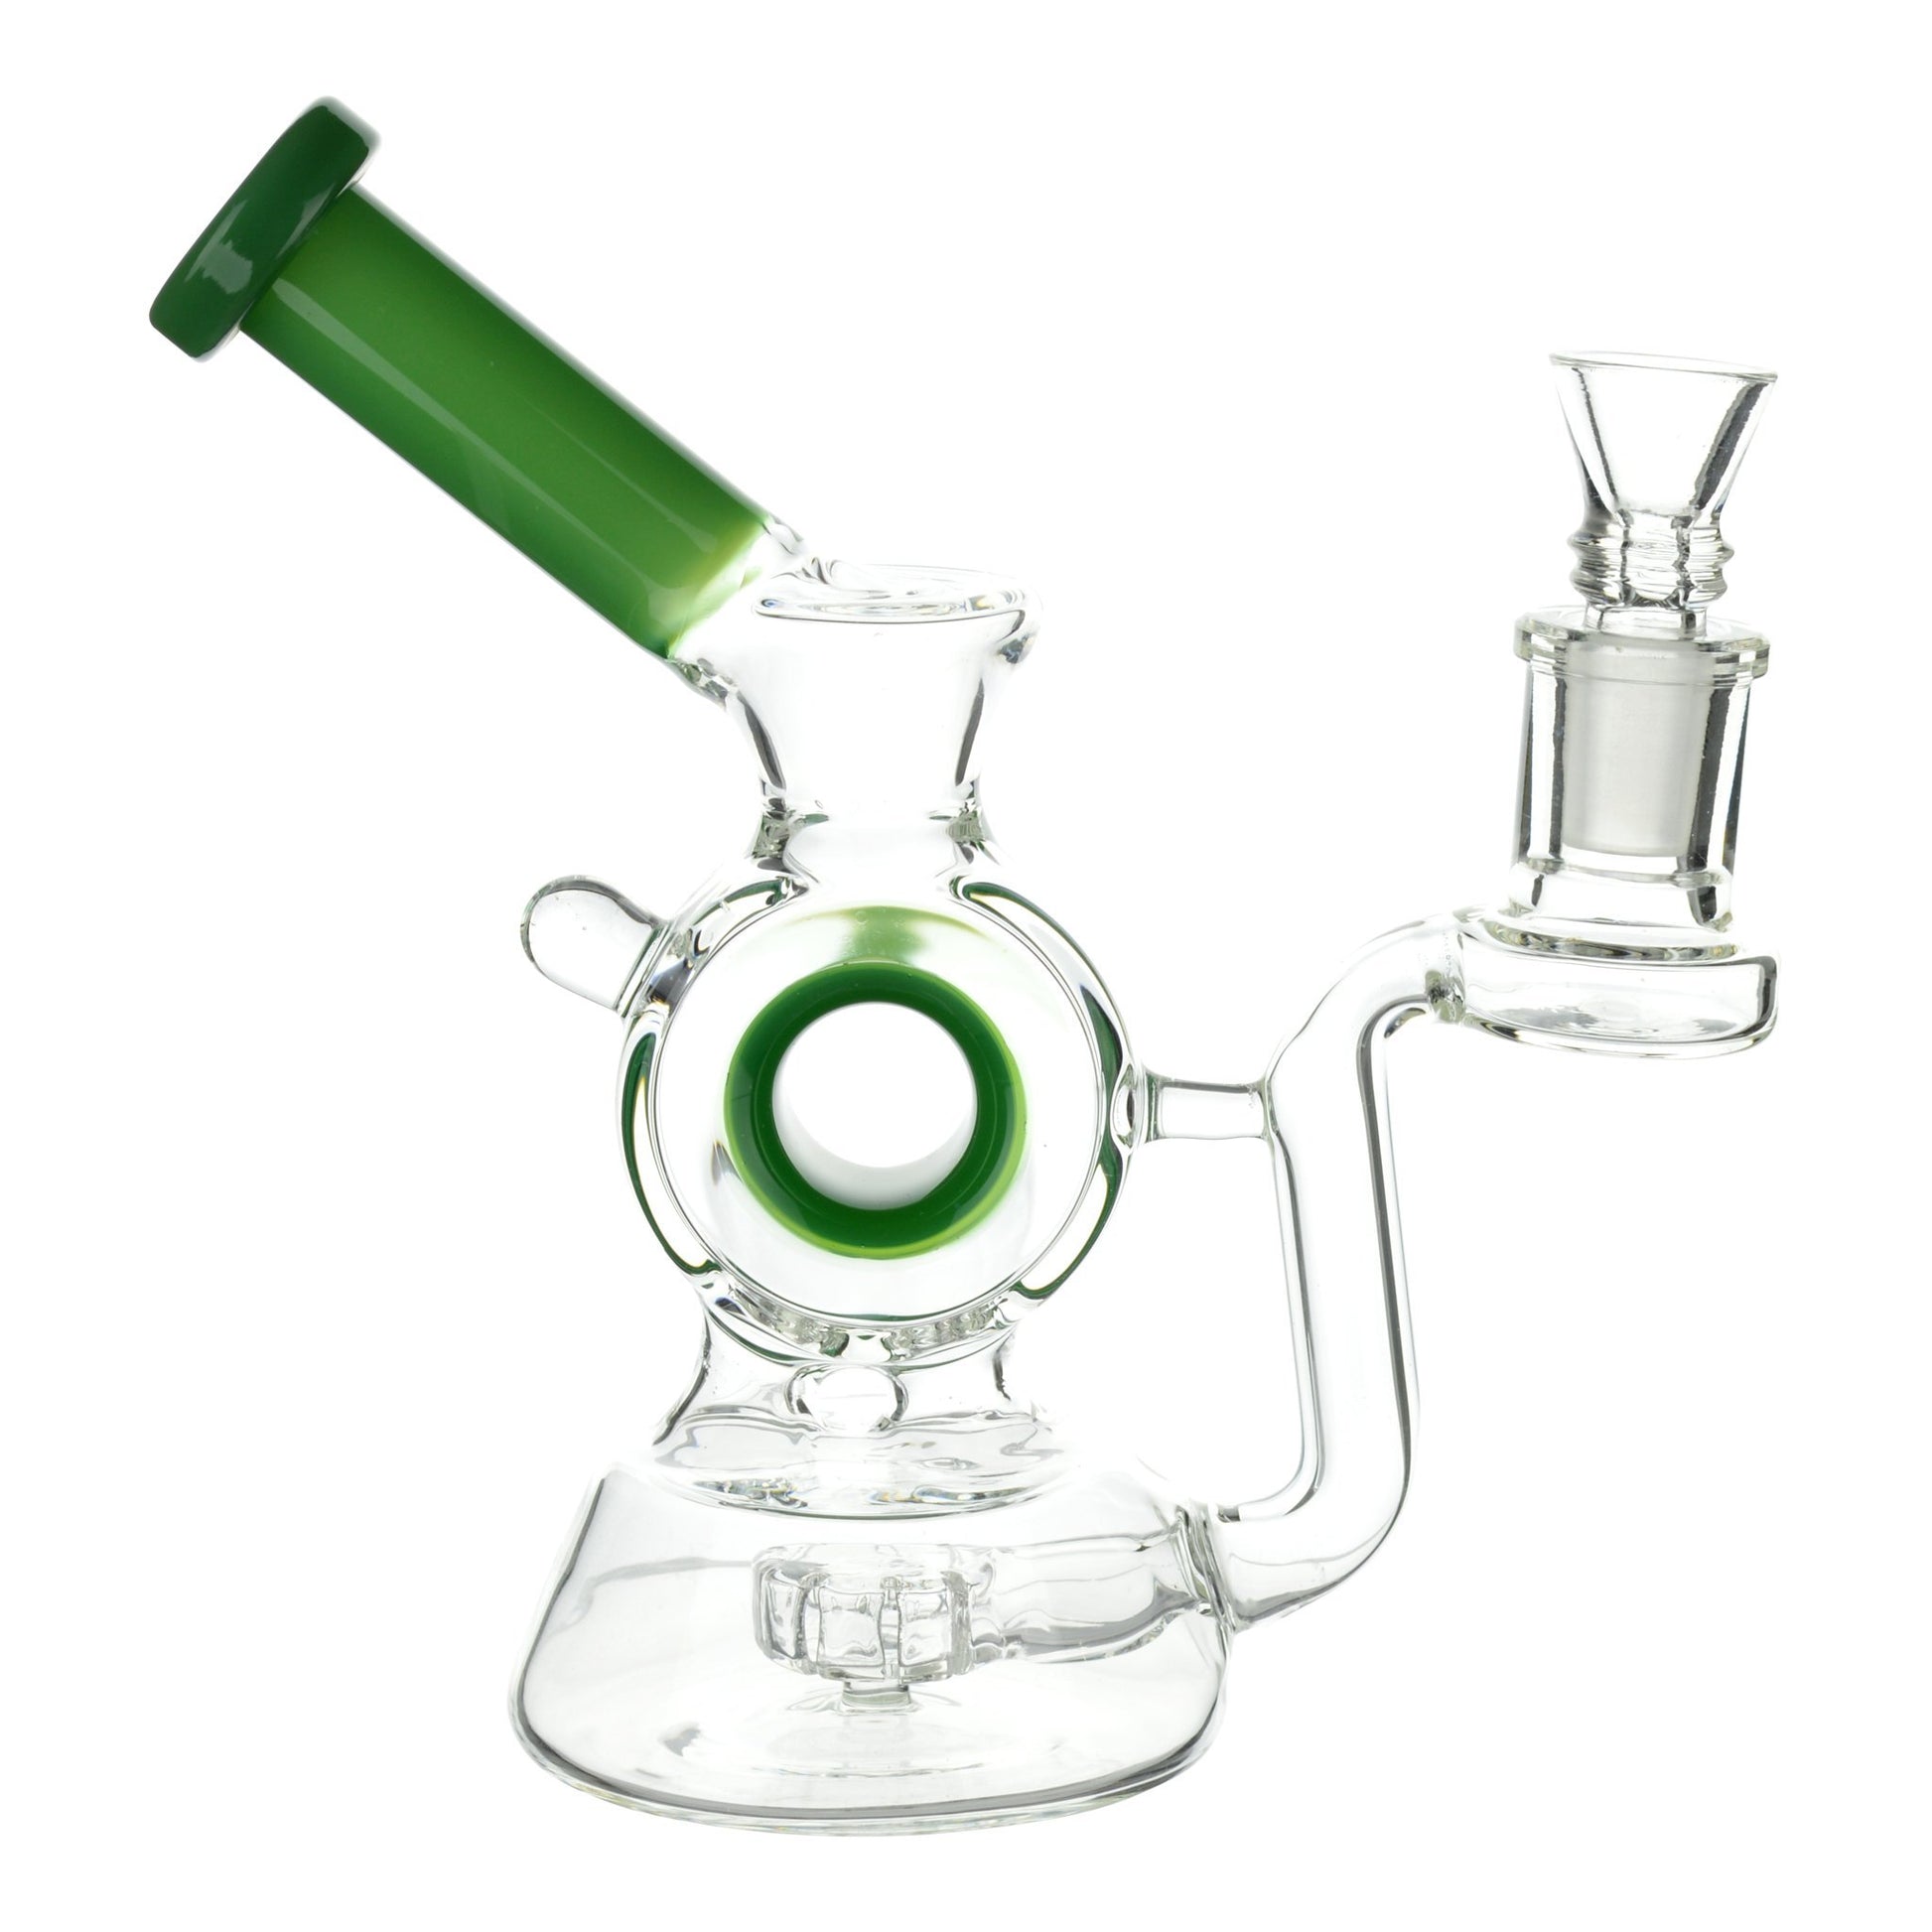 Full shot of the 6-inch clear glass bong with donut perc green accent and green mouthpiece tilted left